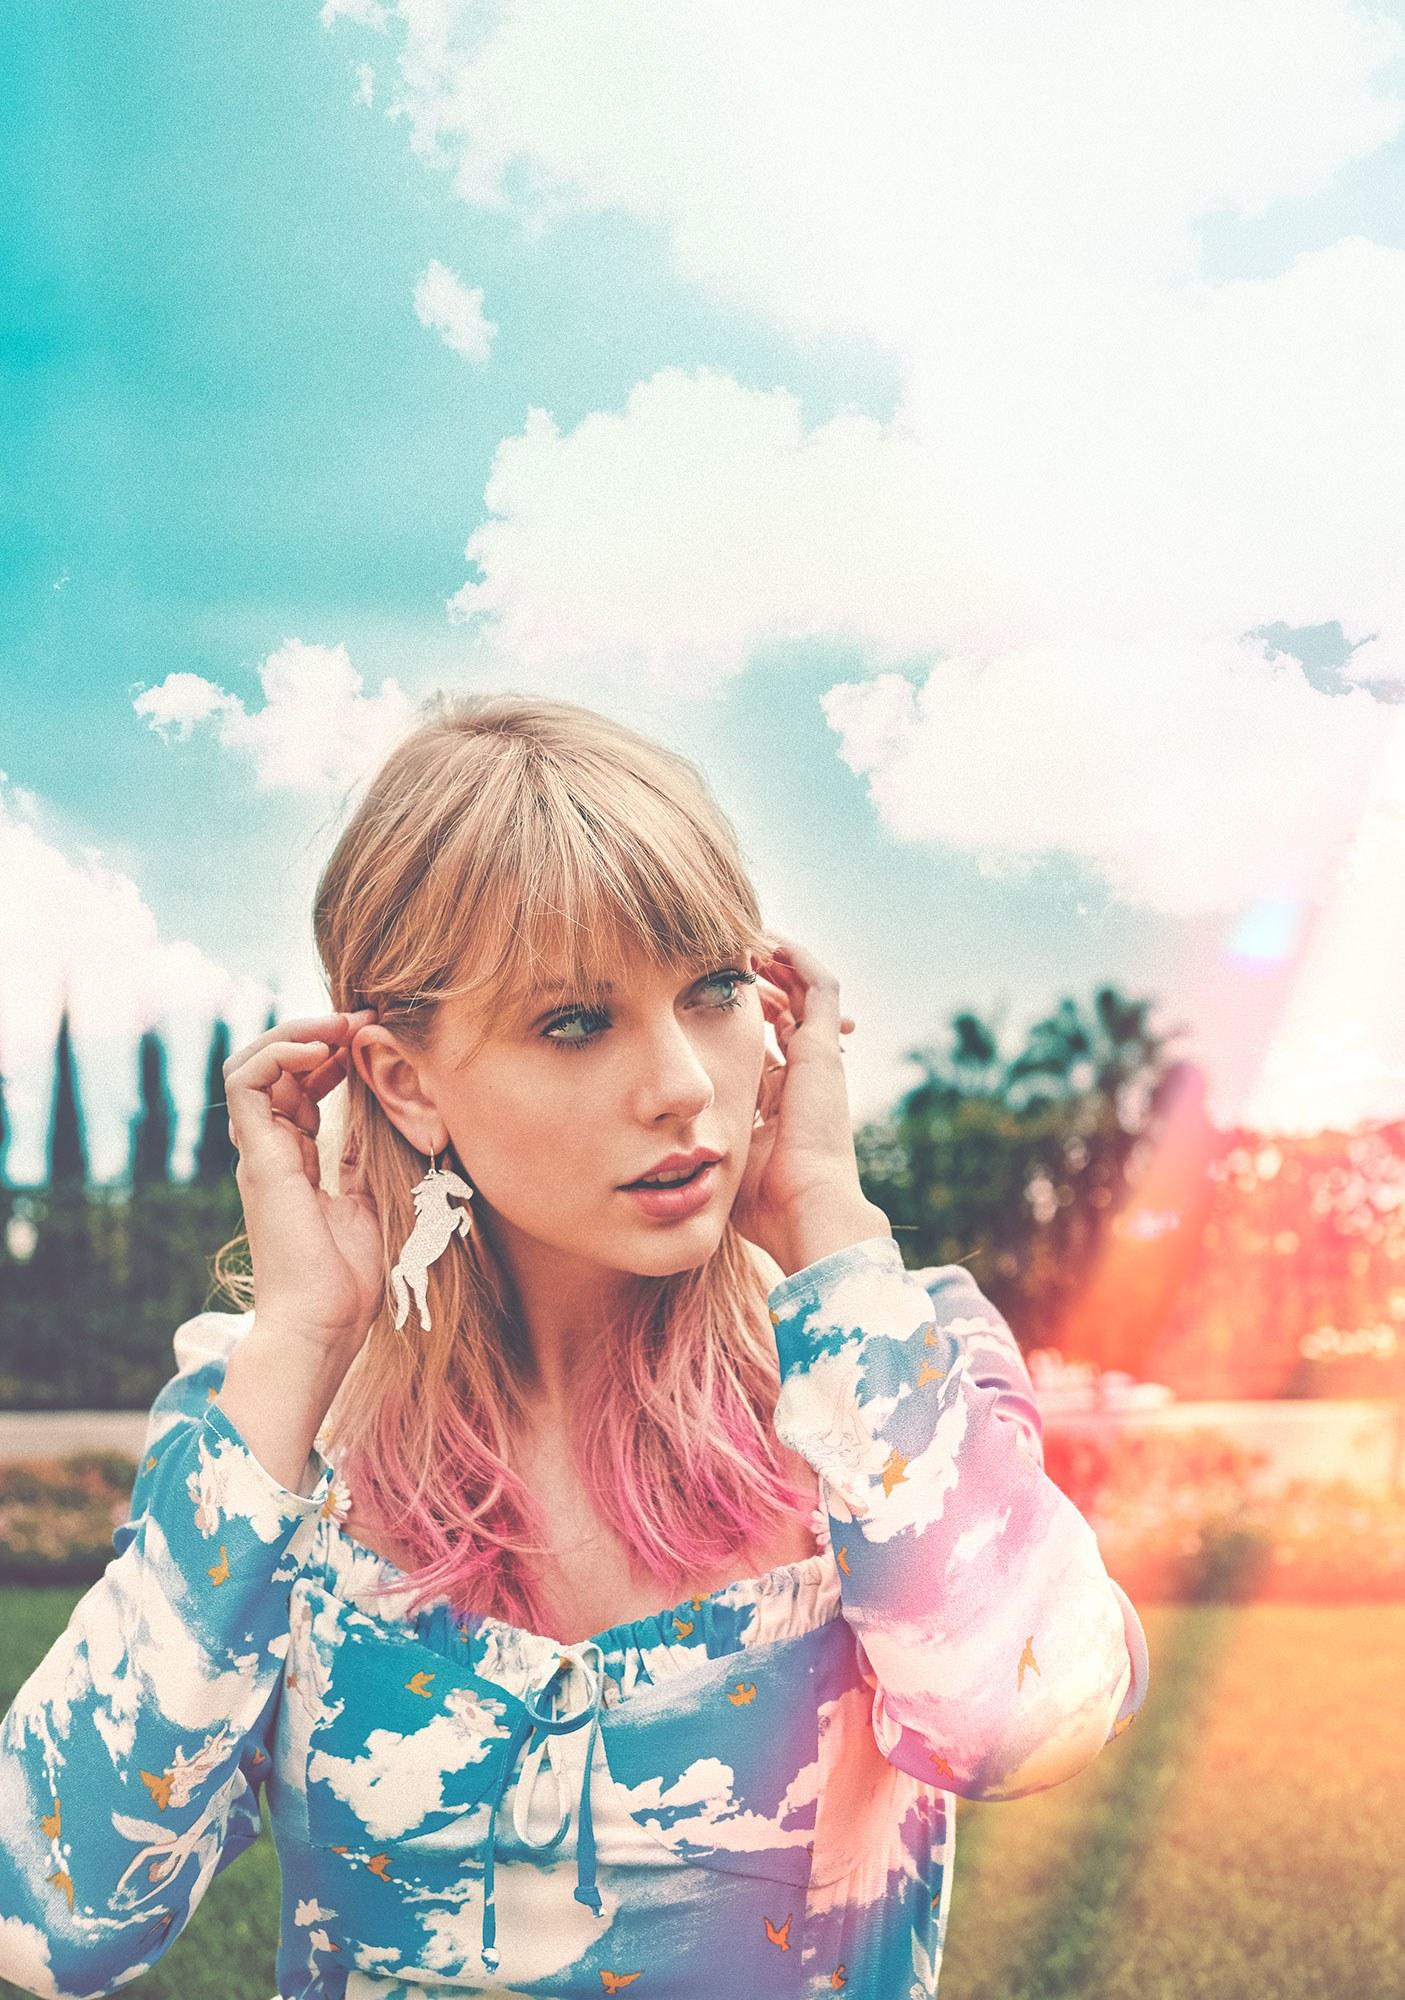 Taylor Swift's Song “ME!” Is Candy Colored Proof That She